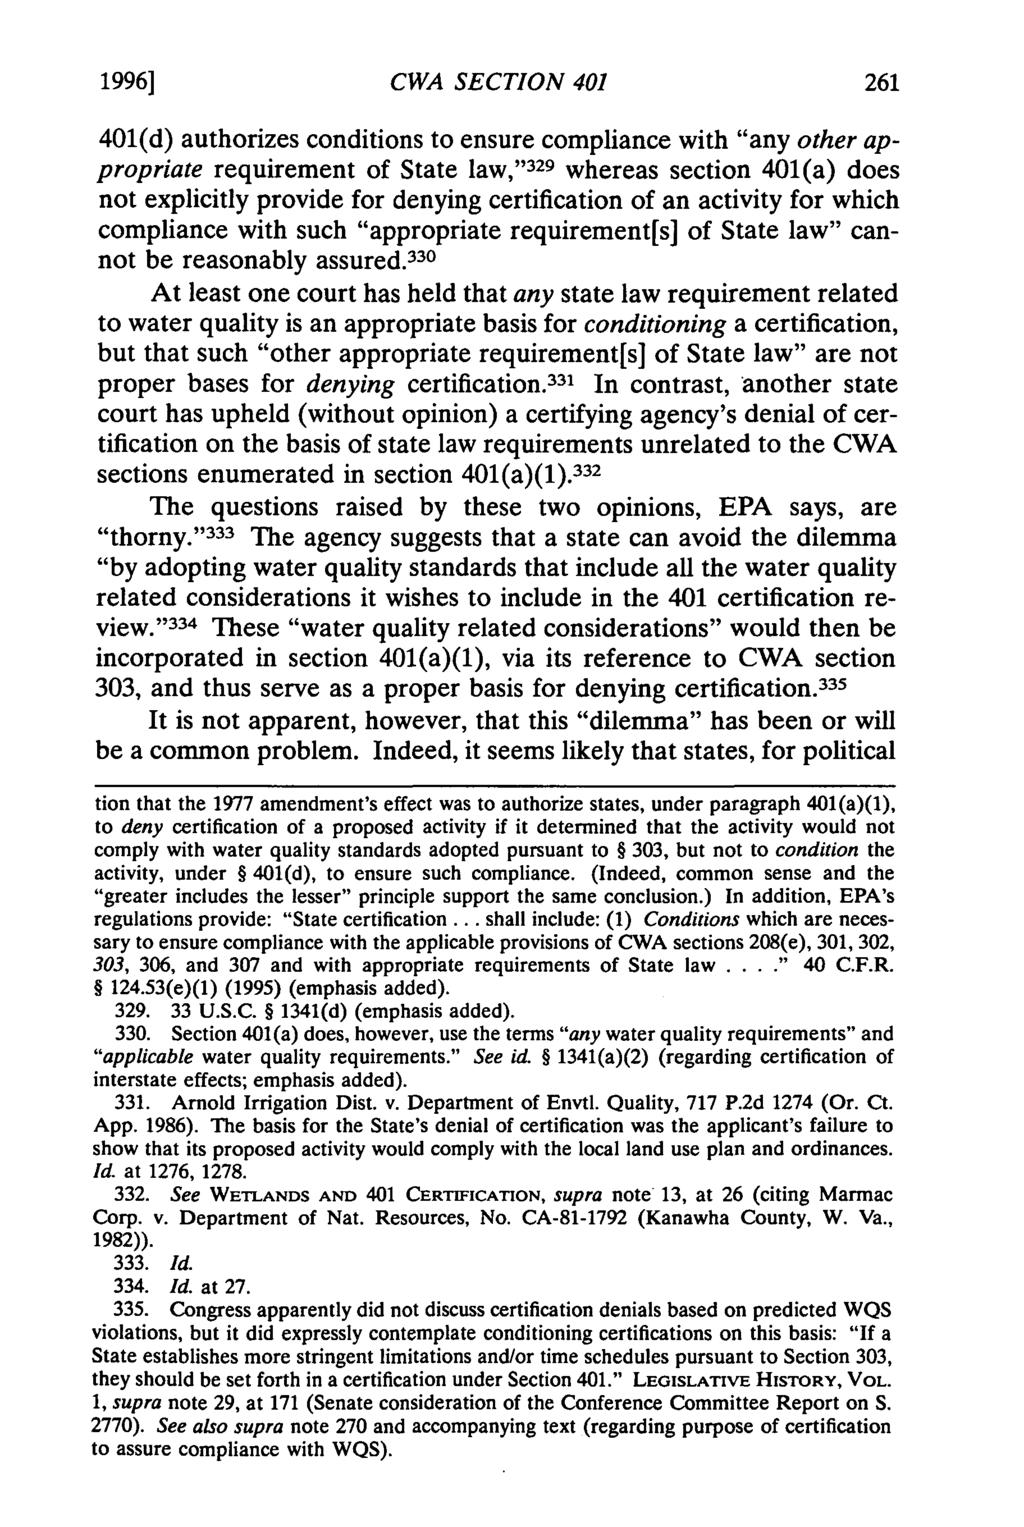 1996] CWA SECTION 401 401(d) authorizes conditions to ensure compliance with "any other appropriate requirement of State law, '329 whereas section 401(a) does not explicitly provide for denying